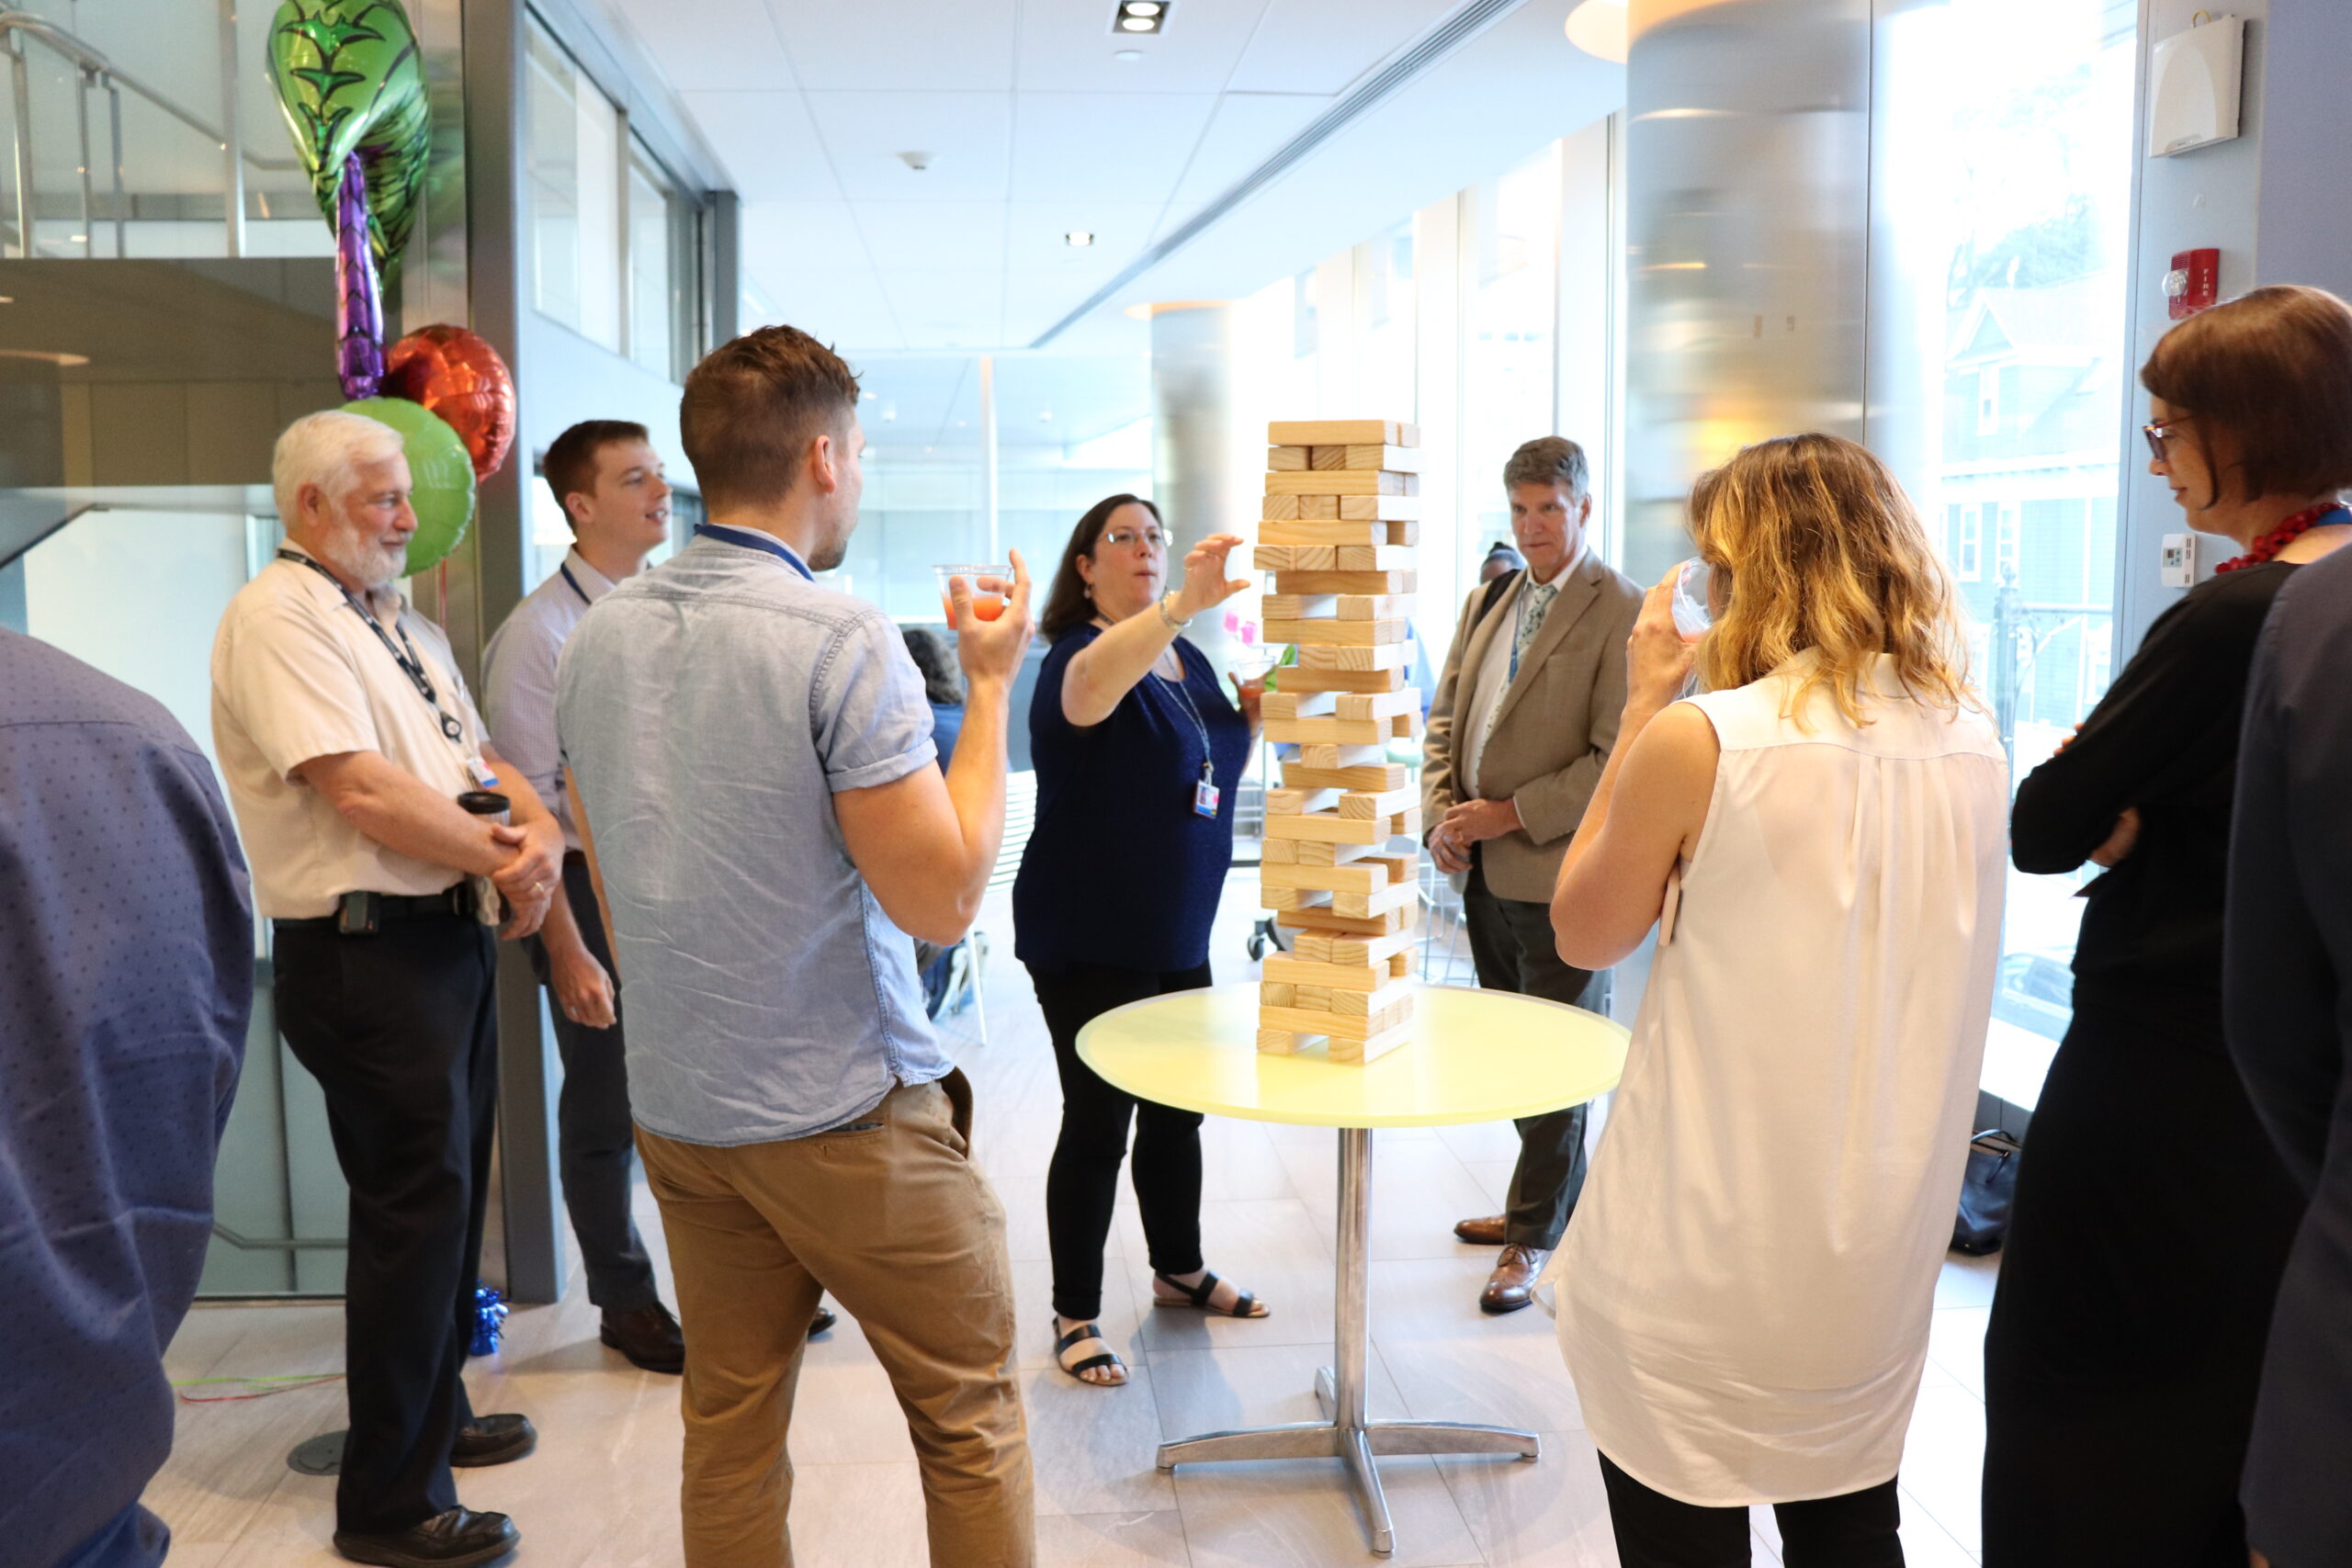 Brigham research staff enjoying a game of jenga at the 2019 event.